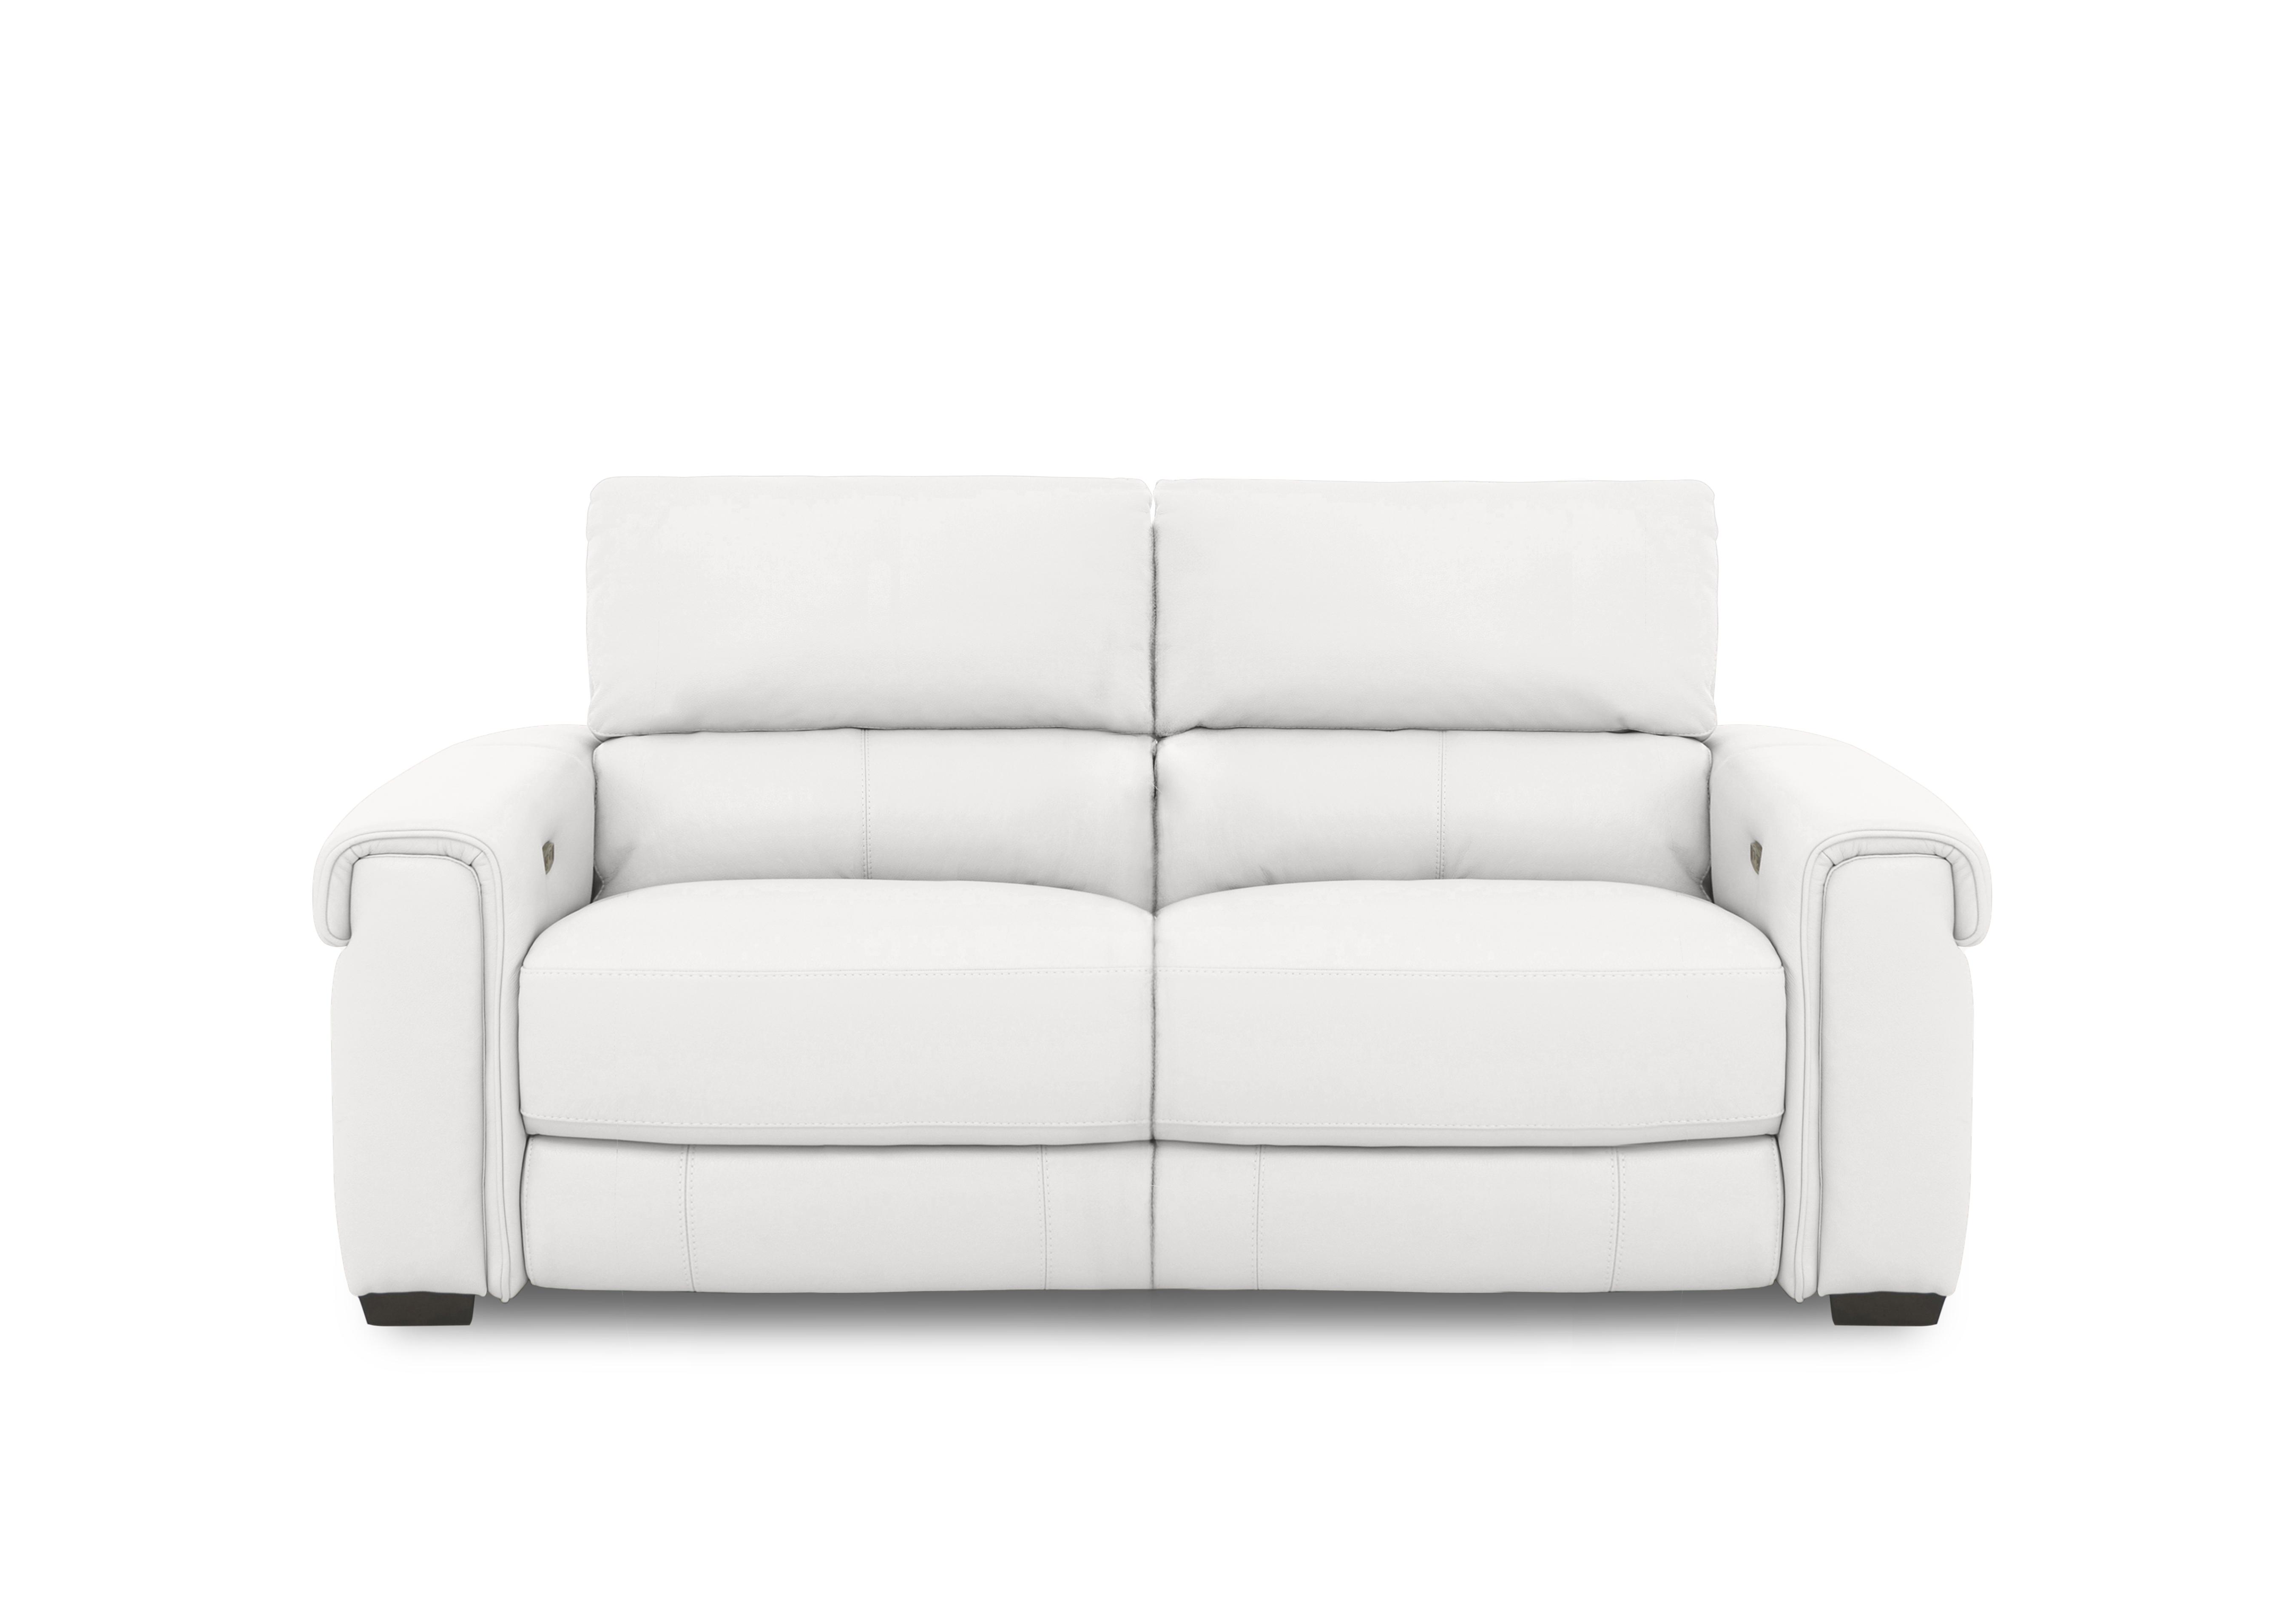 Nixon Leather 3 Seater Sofa in Bv-744d Star White on Furniture Village